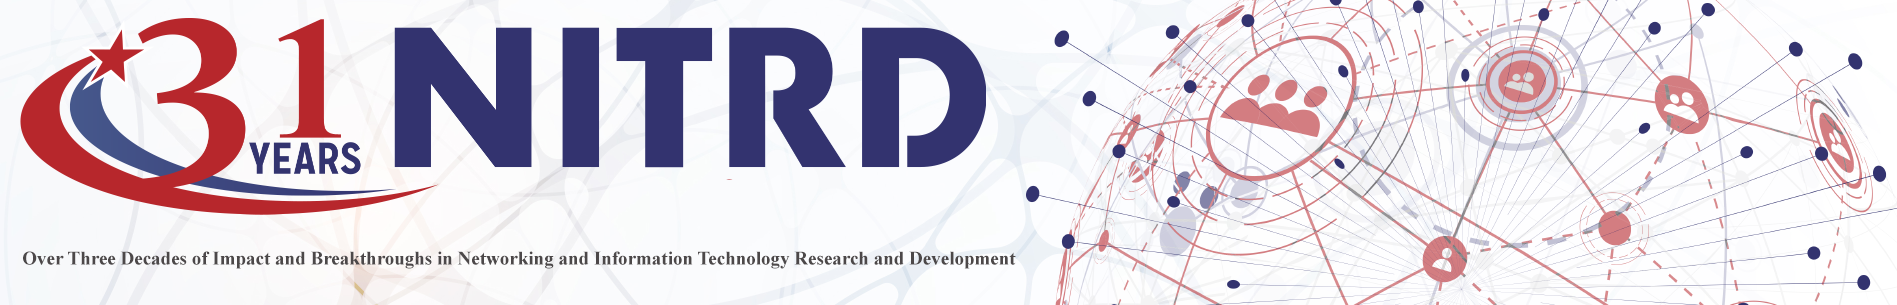 NITRD - 31 Years - Innovation Through NITRD Coordination and Collaboration